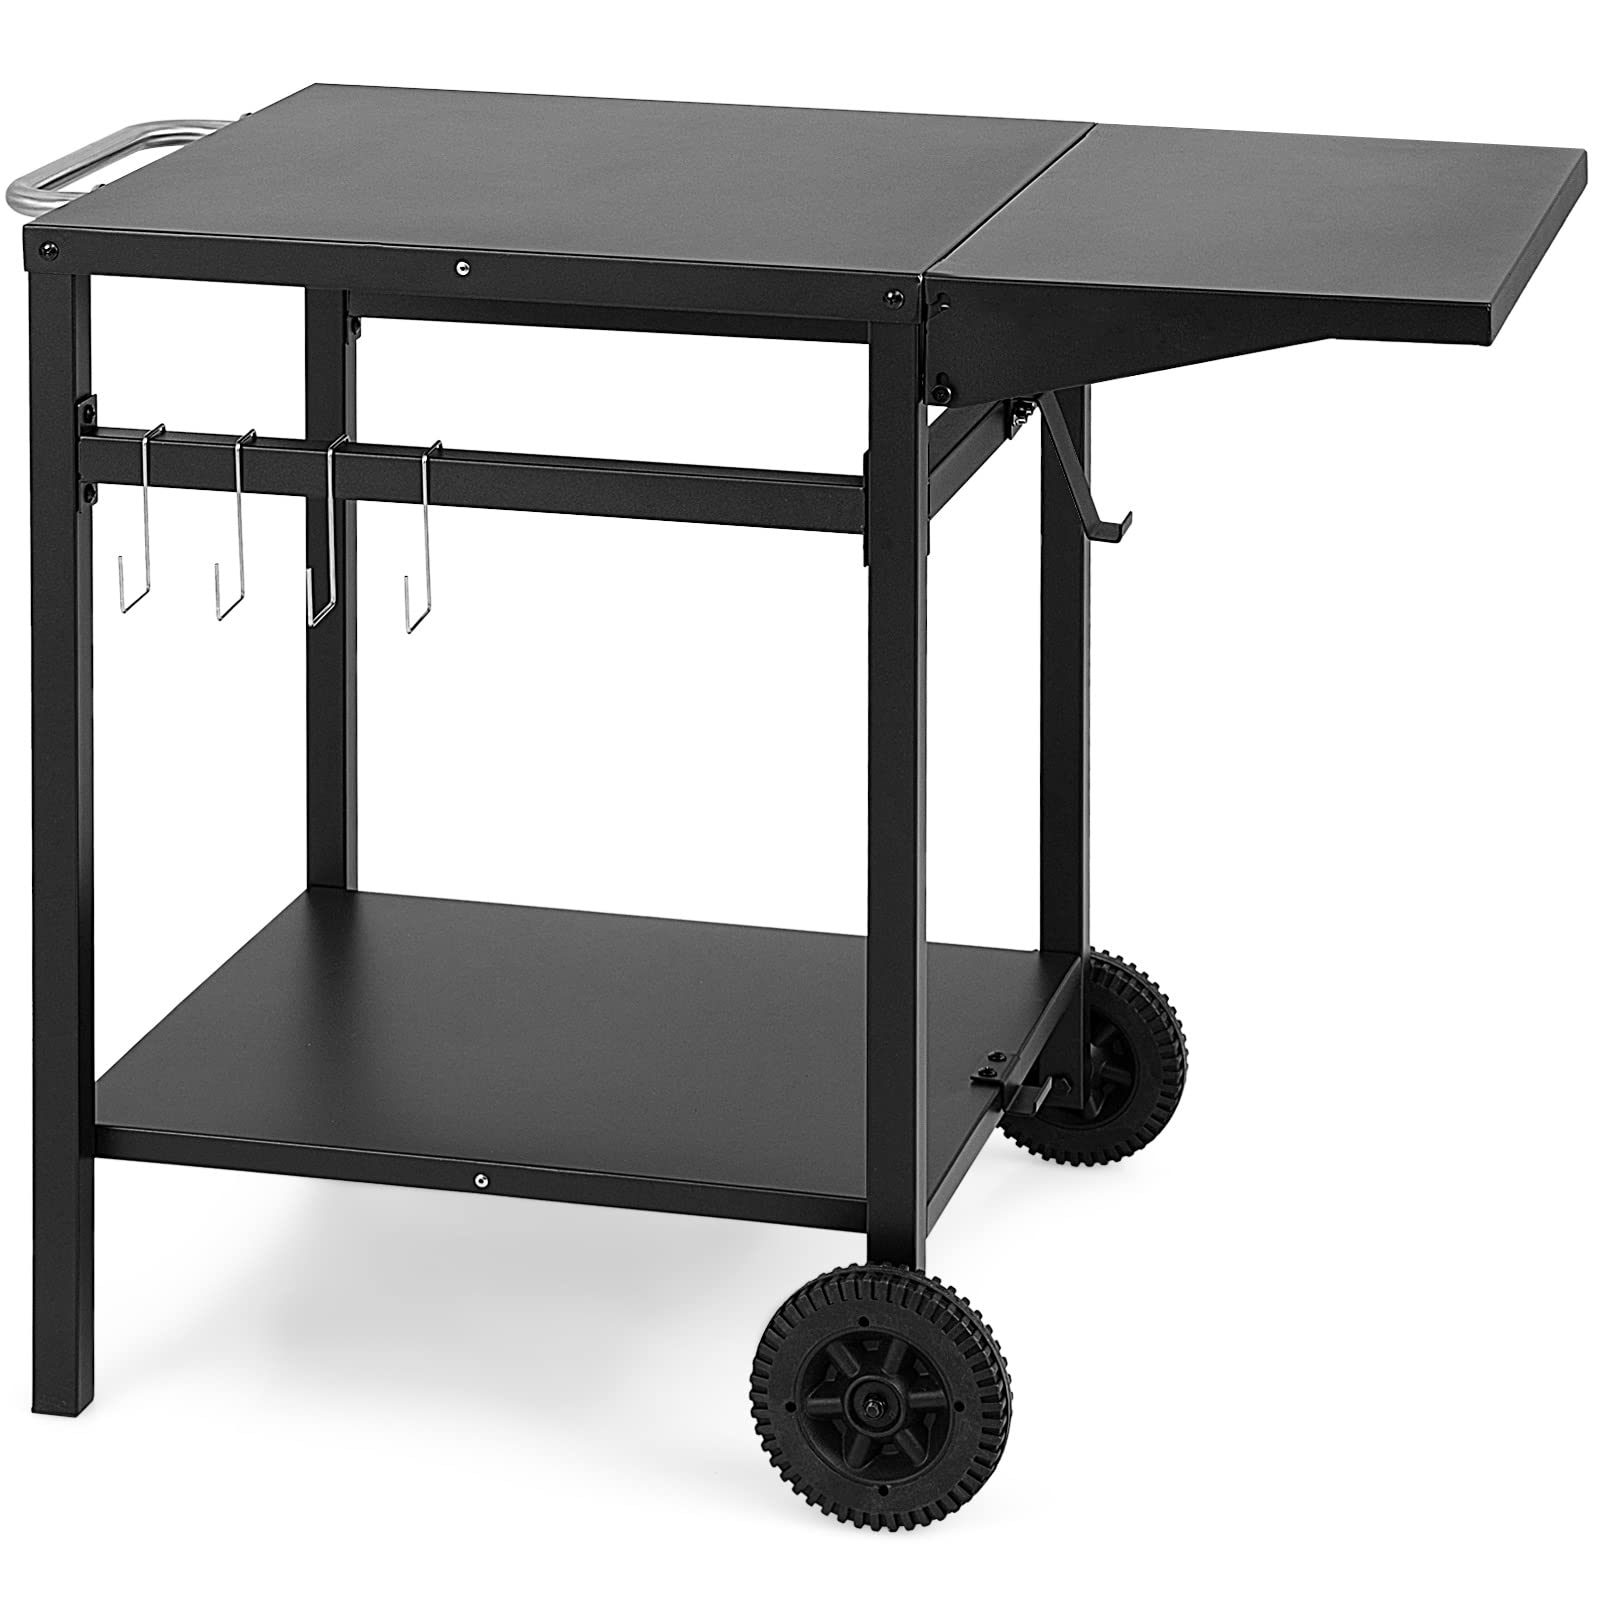 Giantex Outdoor Pizza Oven Stand Grill Cart with Wheels, Foldable Side Table, Gas Tank Hook